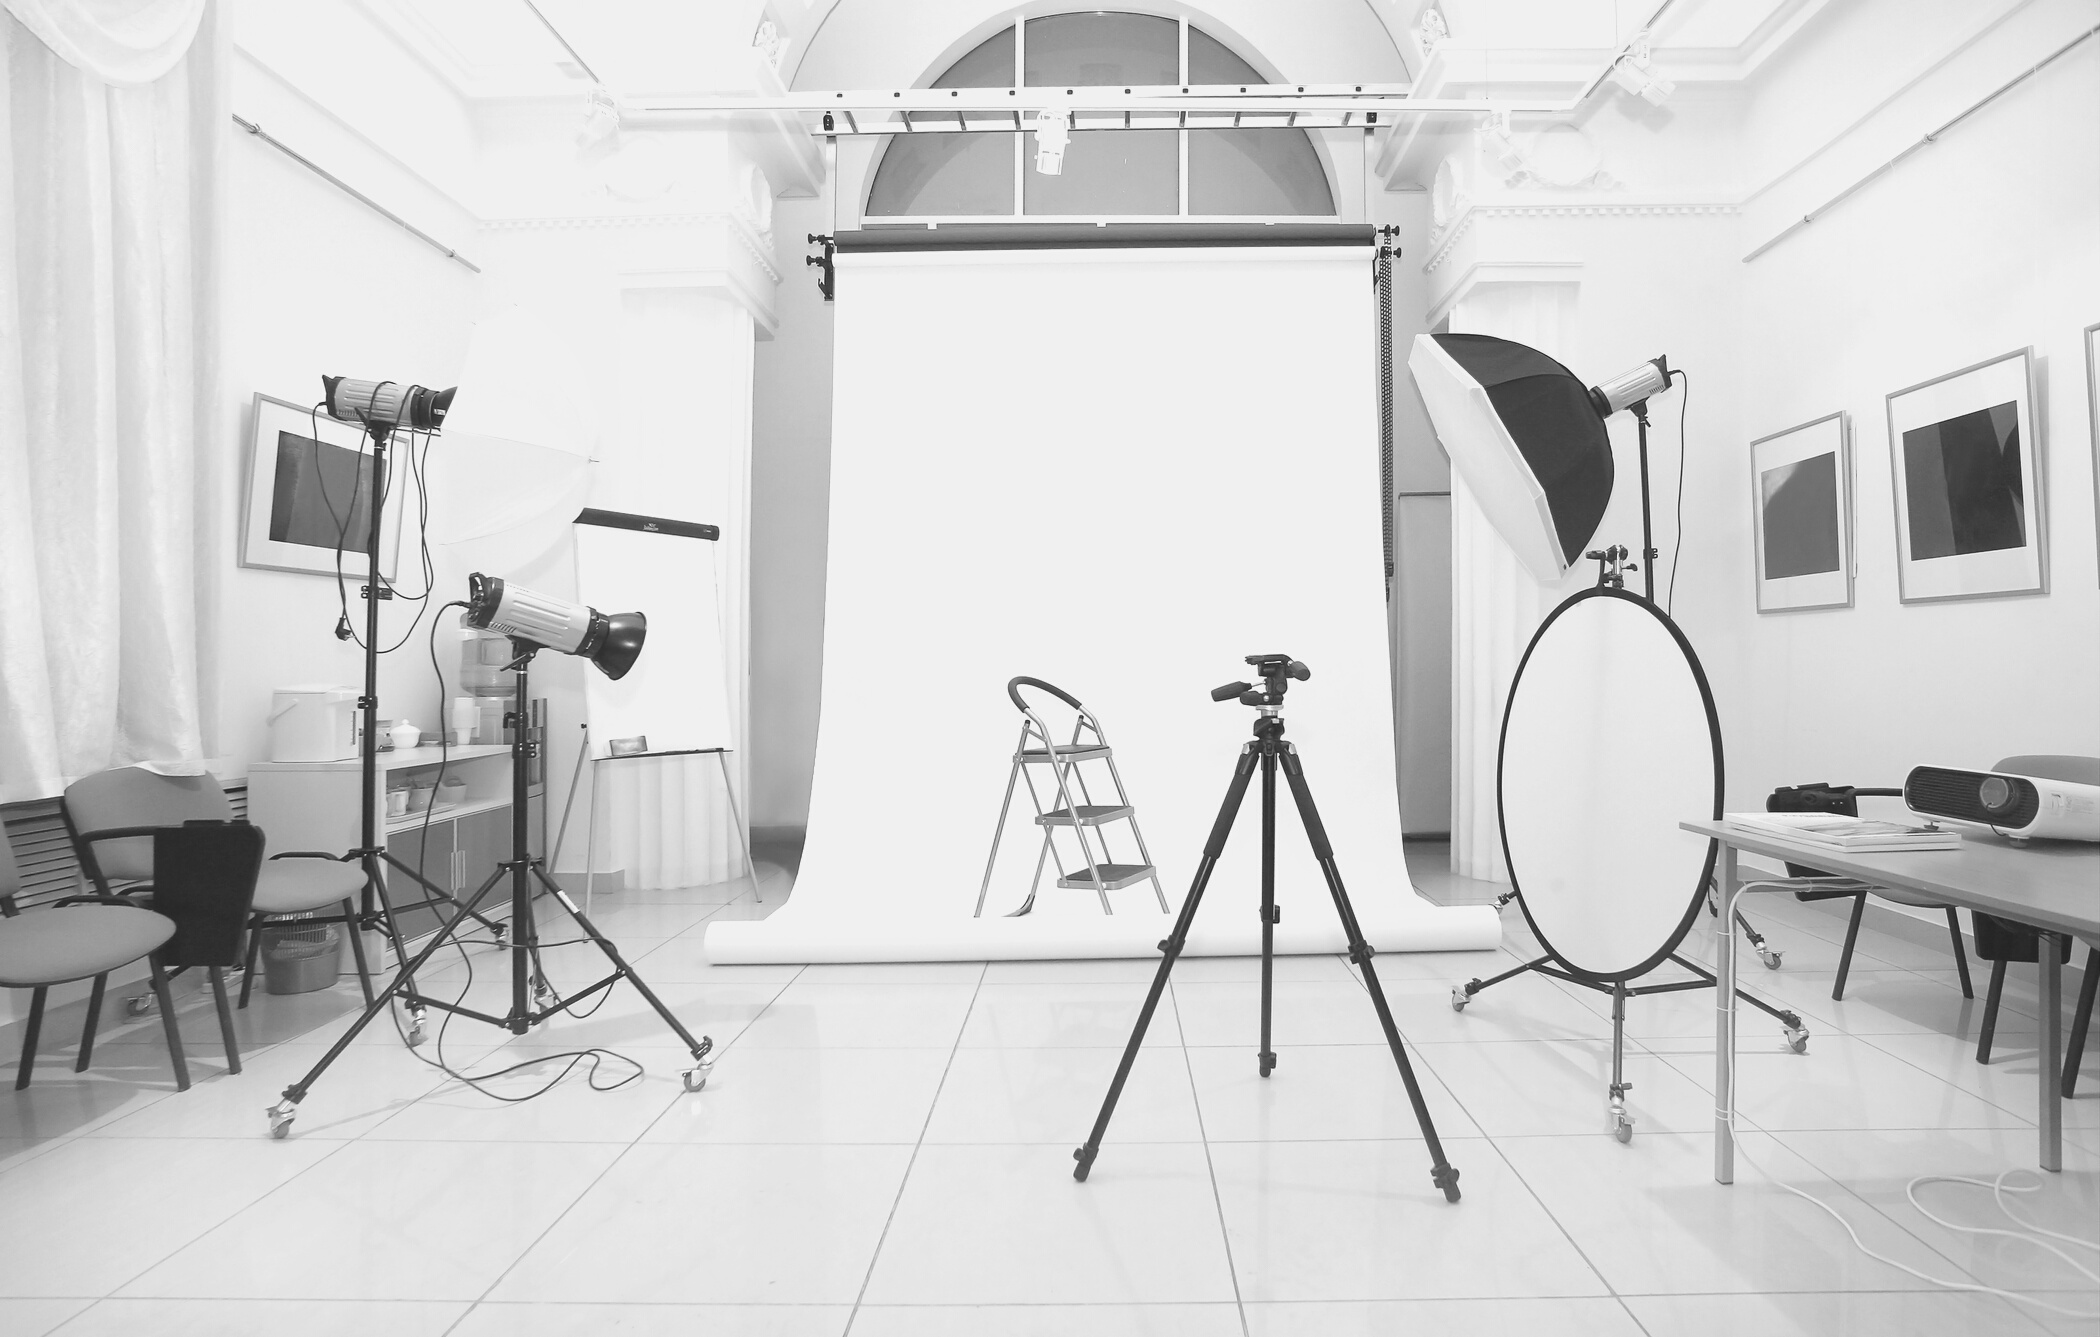 Photography studio with several lights and cameras